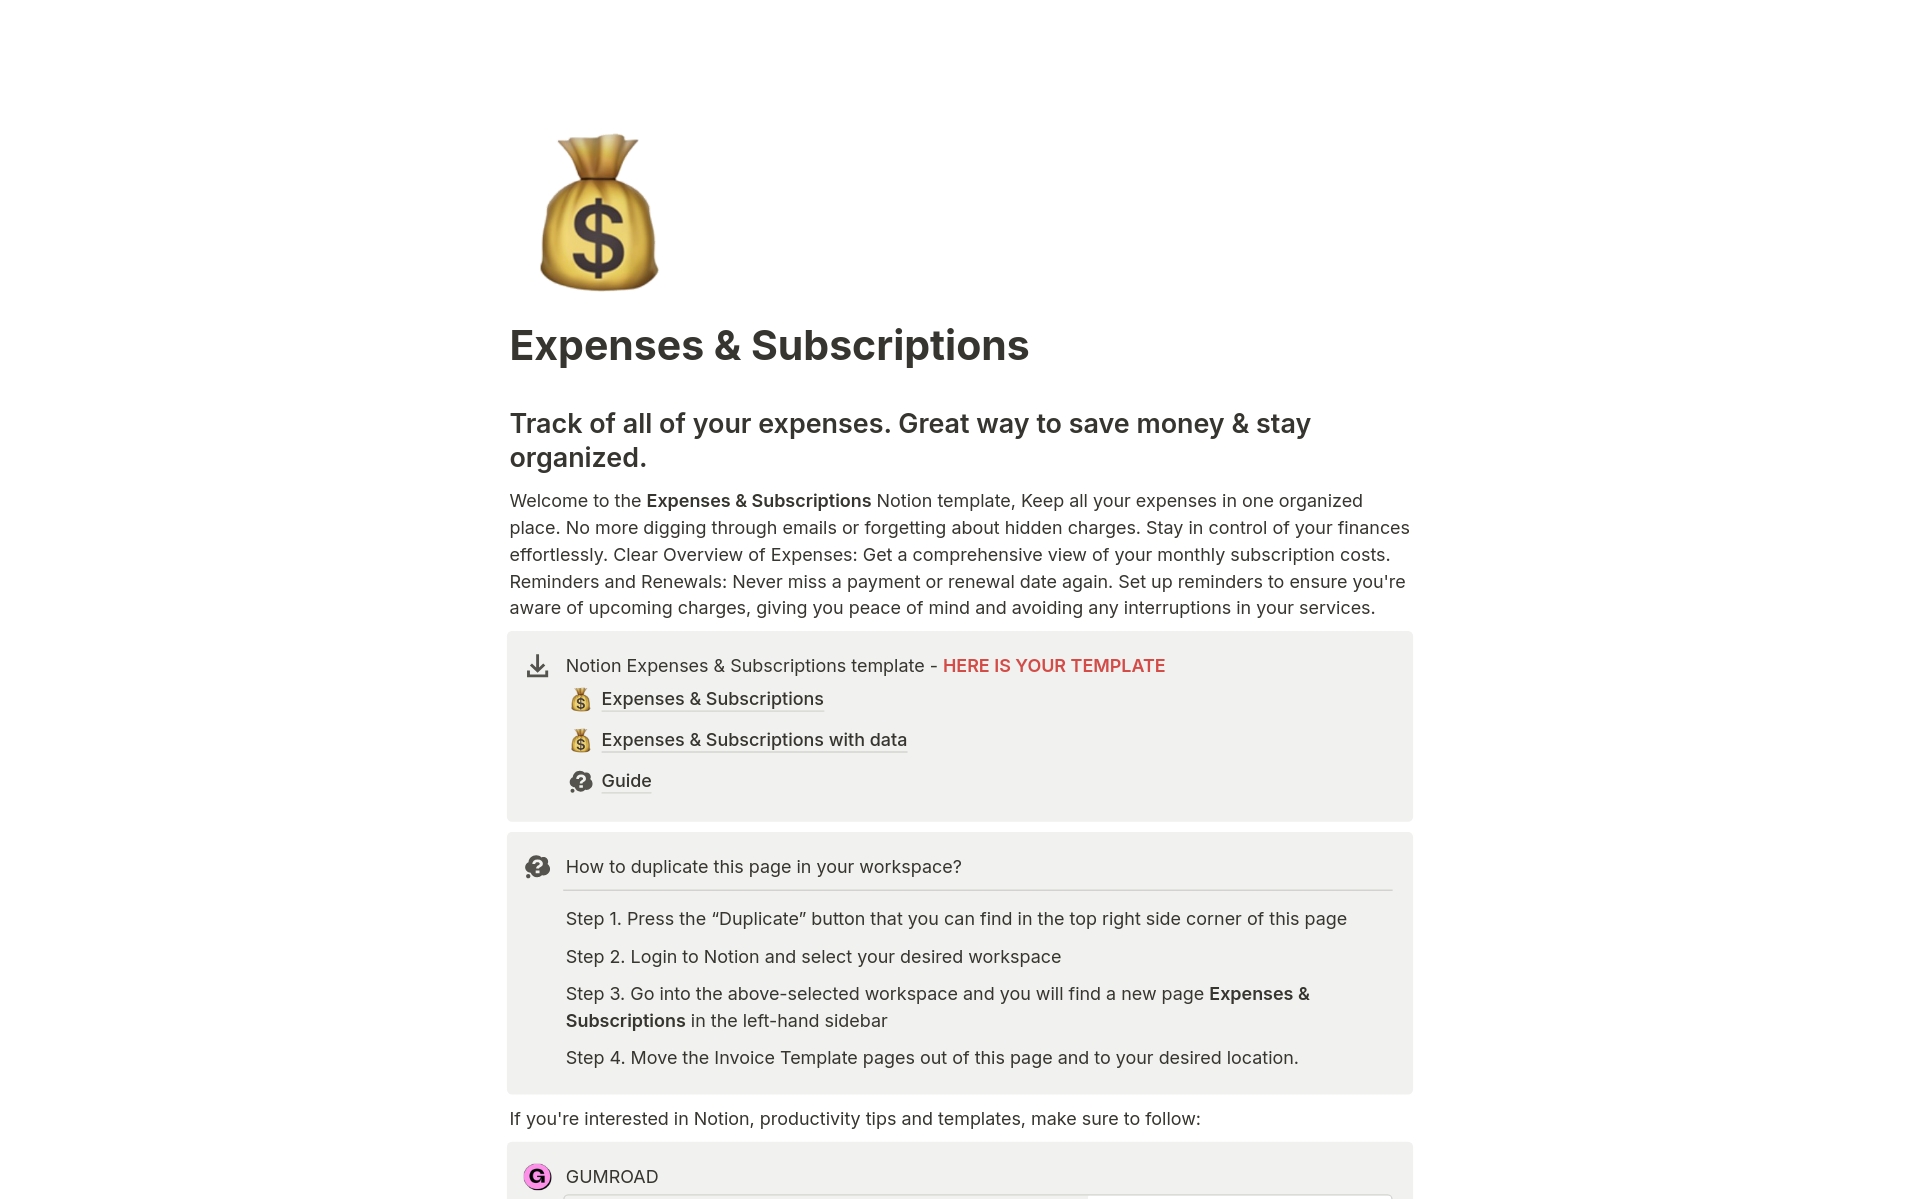 Notion Expenses & Subscriptions template is designed to help you manage your expenses and subscription services in one place.
🪙 Subscriptions 
💵 Expenses 
💳 Renewal
📊 Budget
📆 Monthly Reports
🎯 Goals